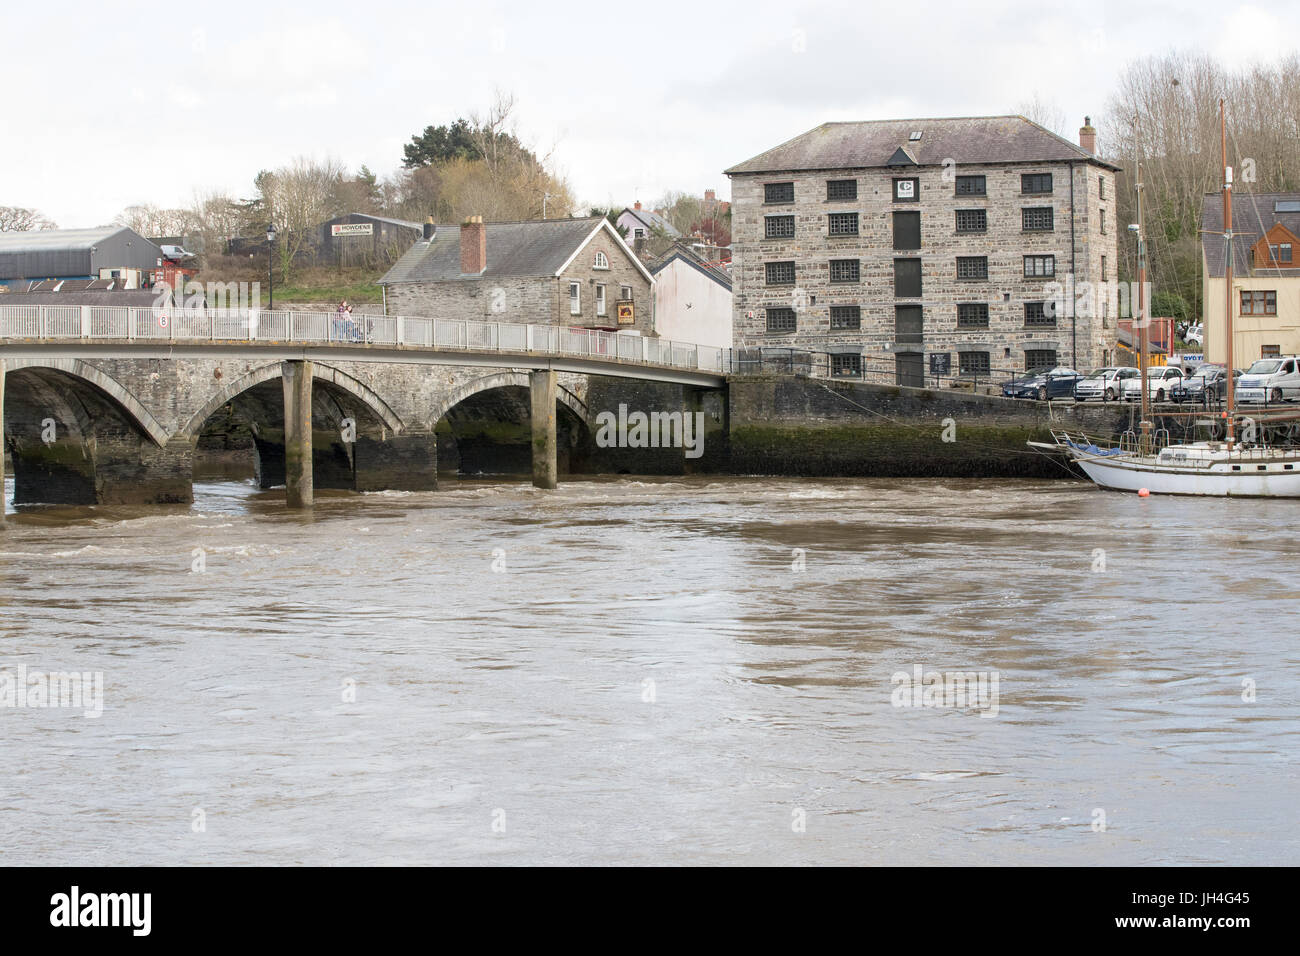 River Teifi at Cardigan in Ceredigion, South West Wales, United Kingdom Stock Photo